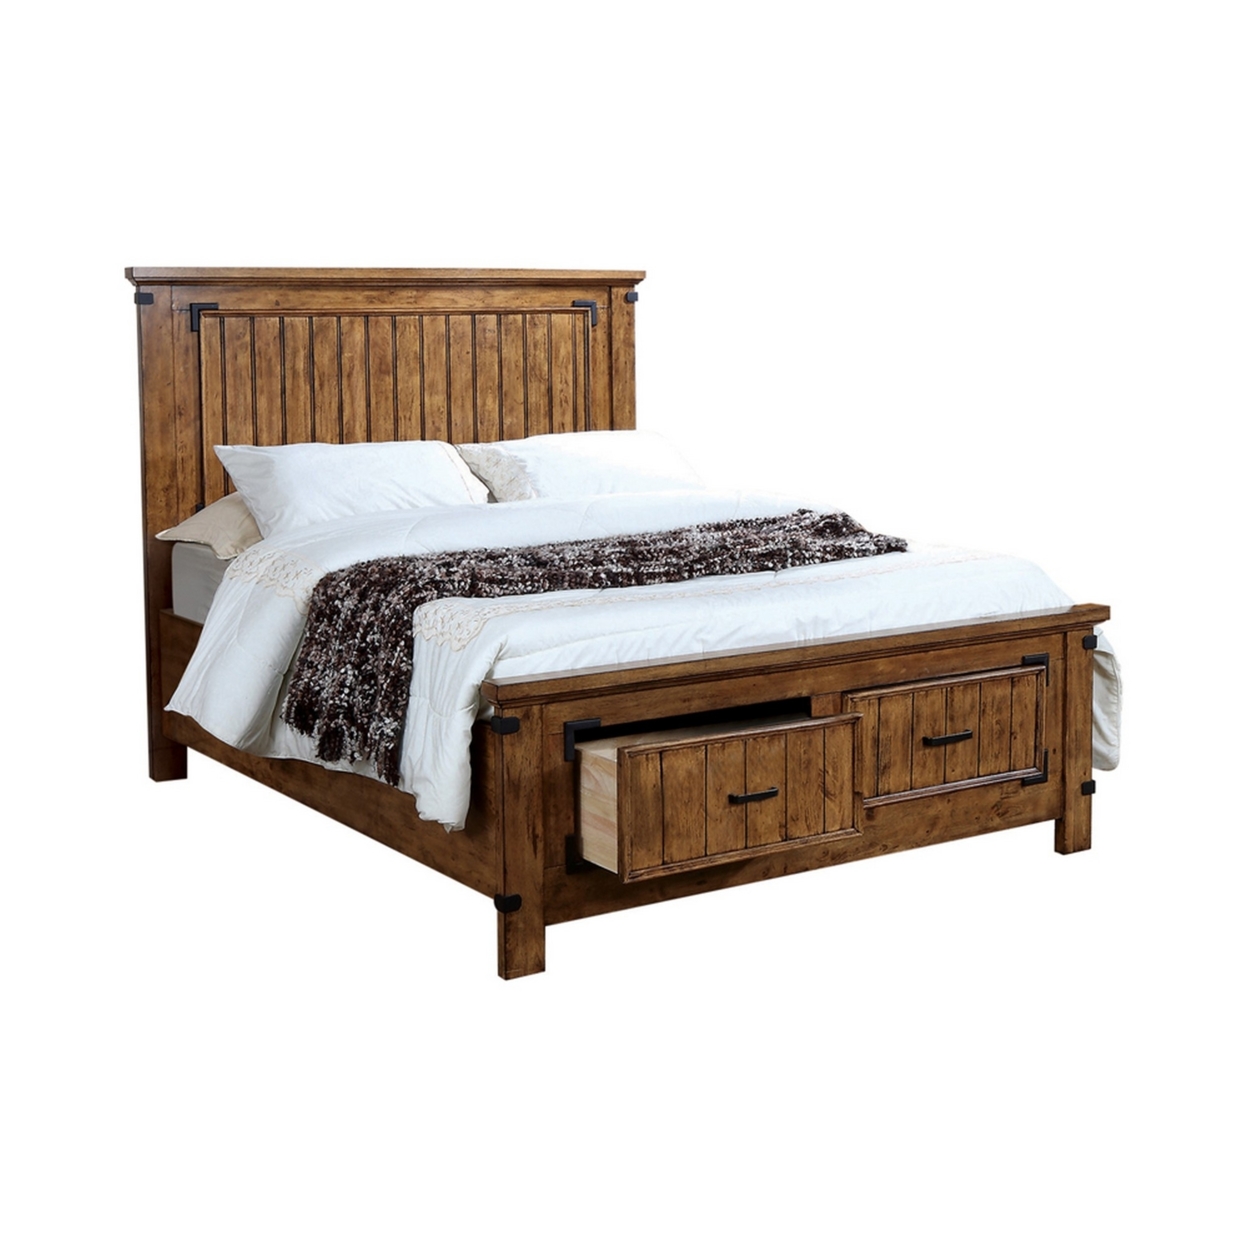 2 Drawers Full Size Bed With Plank Detailing And Metal Accents, Brown- Saltoro Sherpi